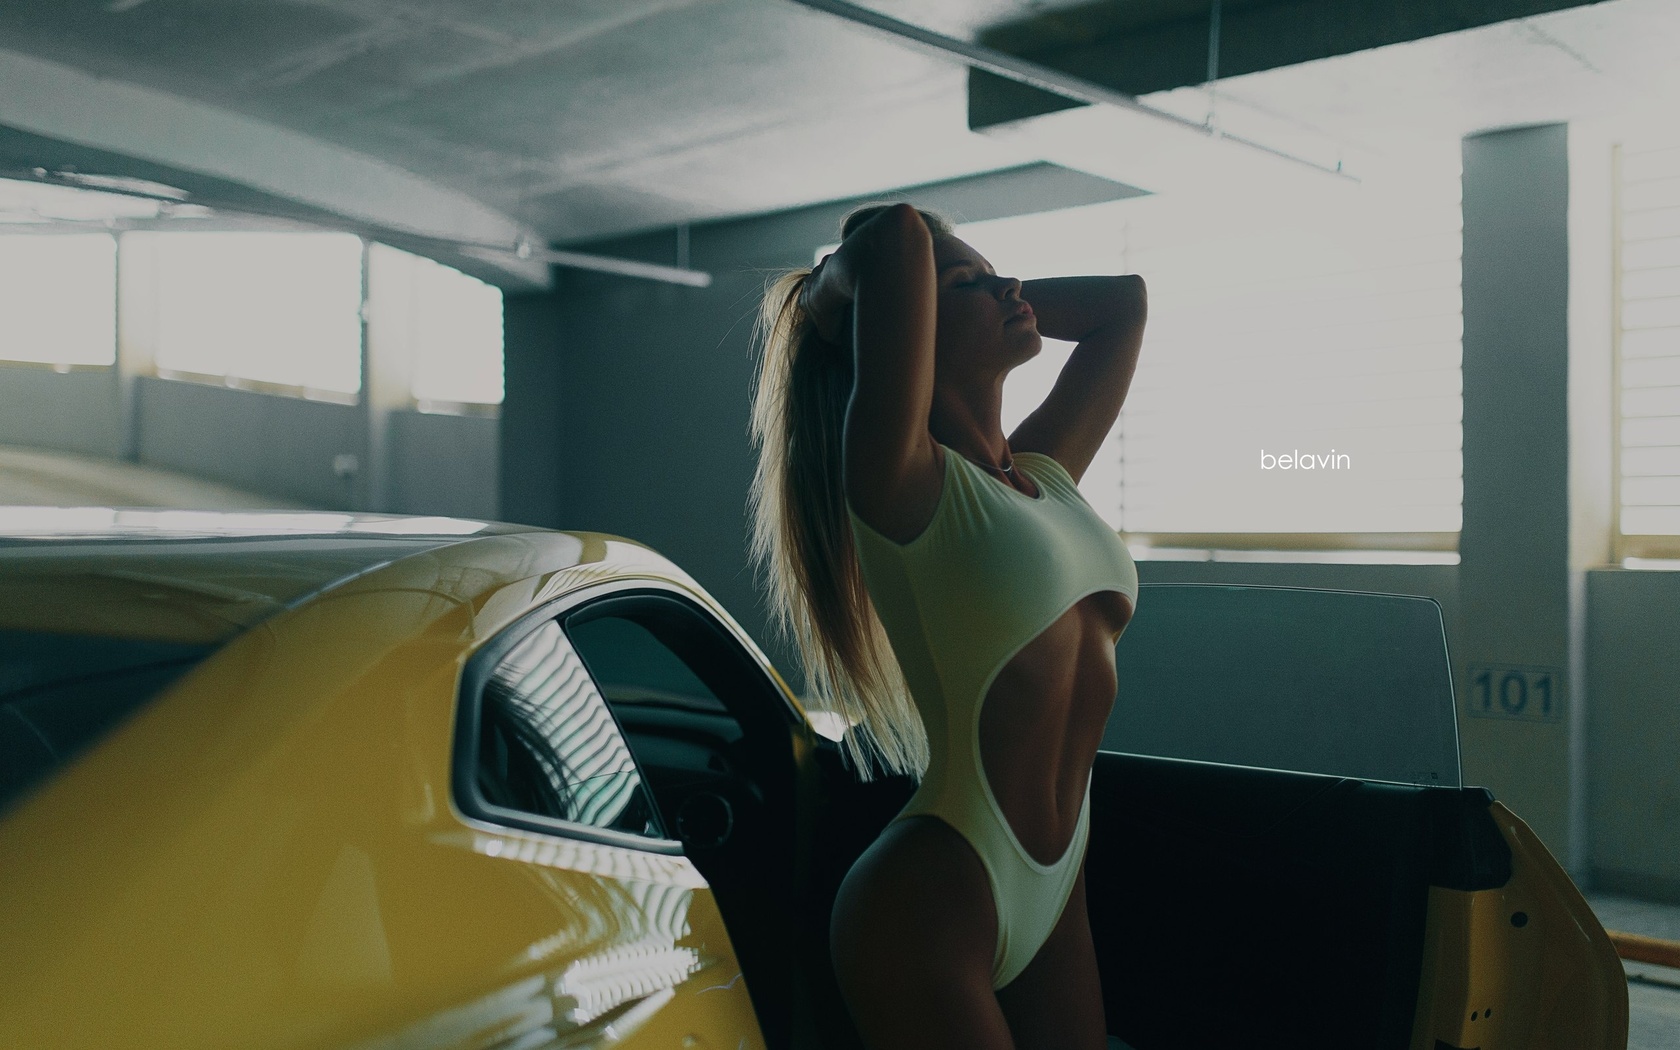 women, alexander belavin, tanned, women with cars, one-piece swimsuit, belly, blonde, closed eyes